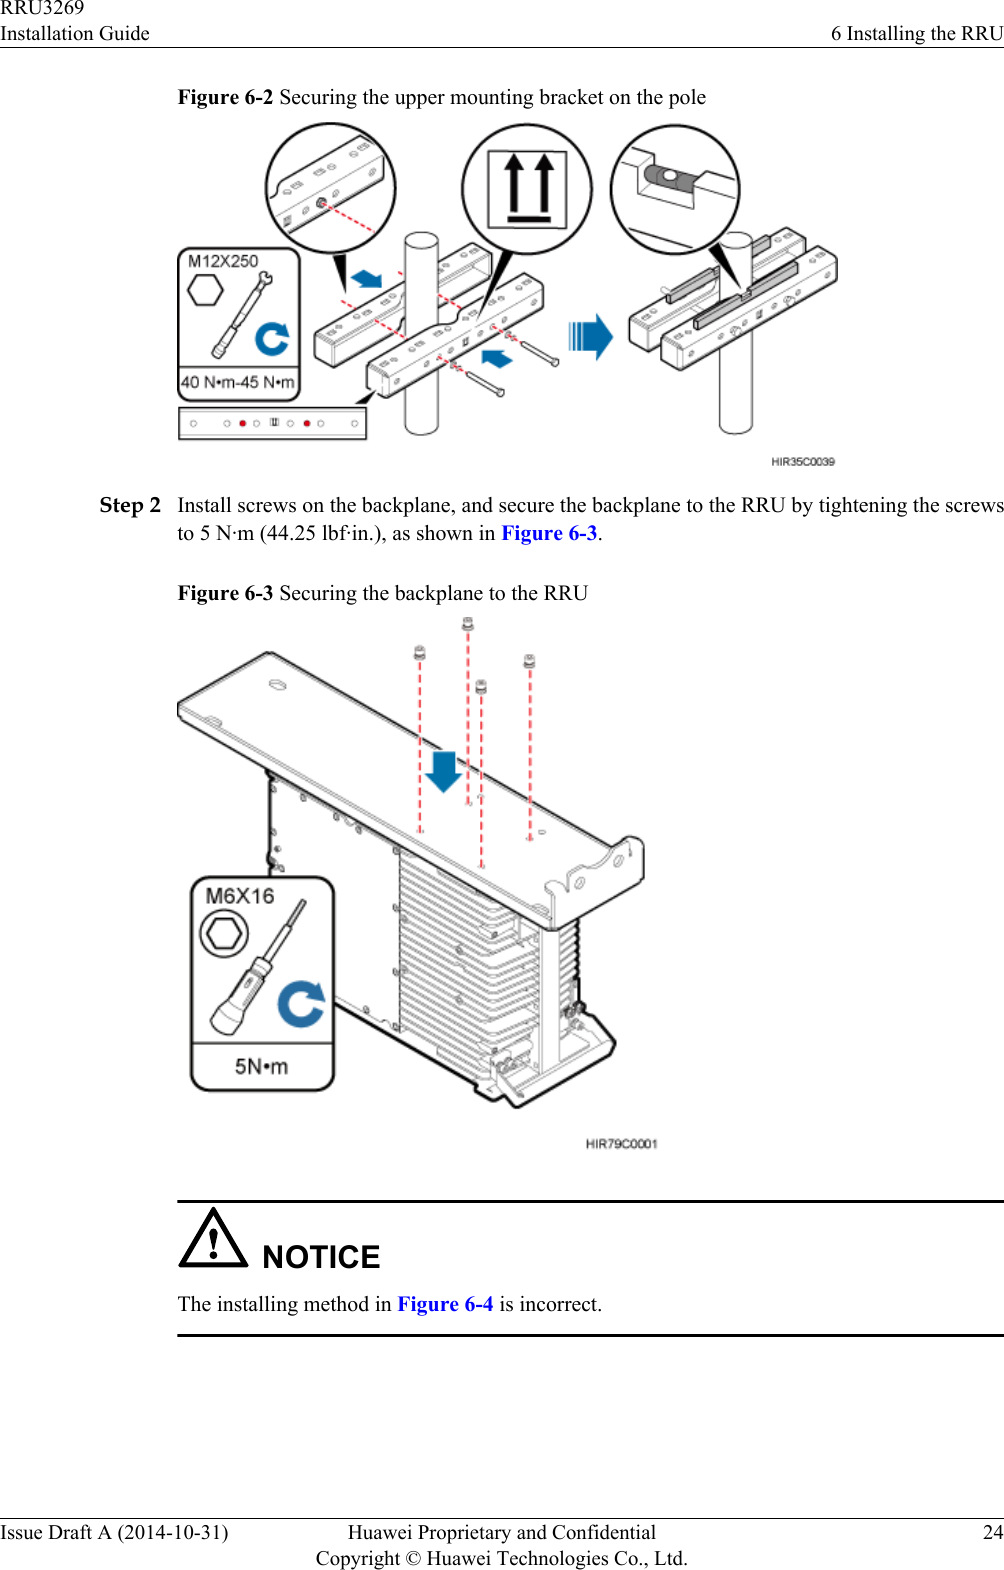 Figure 6-2 Securing the upper mounting bracket on the poleStep 2 Install screws on the backplane, and secure the backplane to the RRU by tightening the screwsto 5 N·m (44.25 lbf·in.), as shown in Figure 6-3.Figure 6-3 Securing the backplane to the RRUNOTICEThe installing method in Figure 6-4 is incorrect.RRU3269Installation Guide 6 Installing the RRUIssue Draft A (2014-10-31) Huawei Proprietary and ConfidentialCopyright © Huawei Technologies Co., Ltd.24